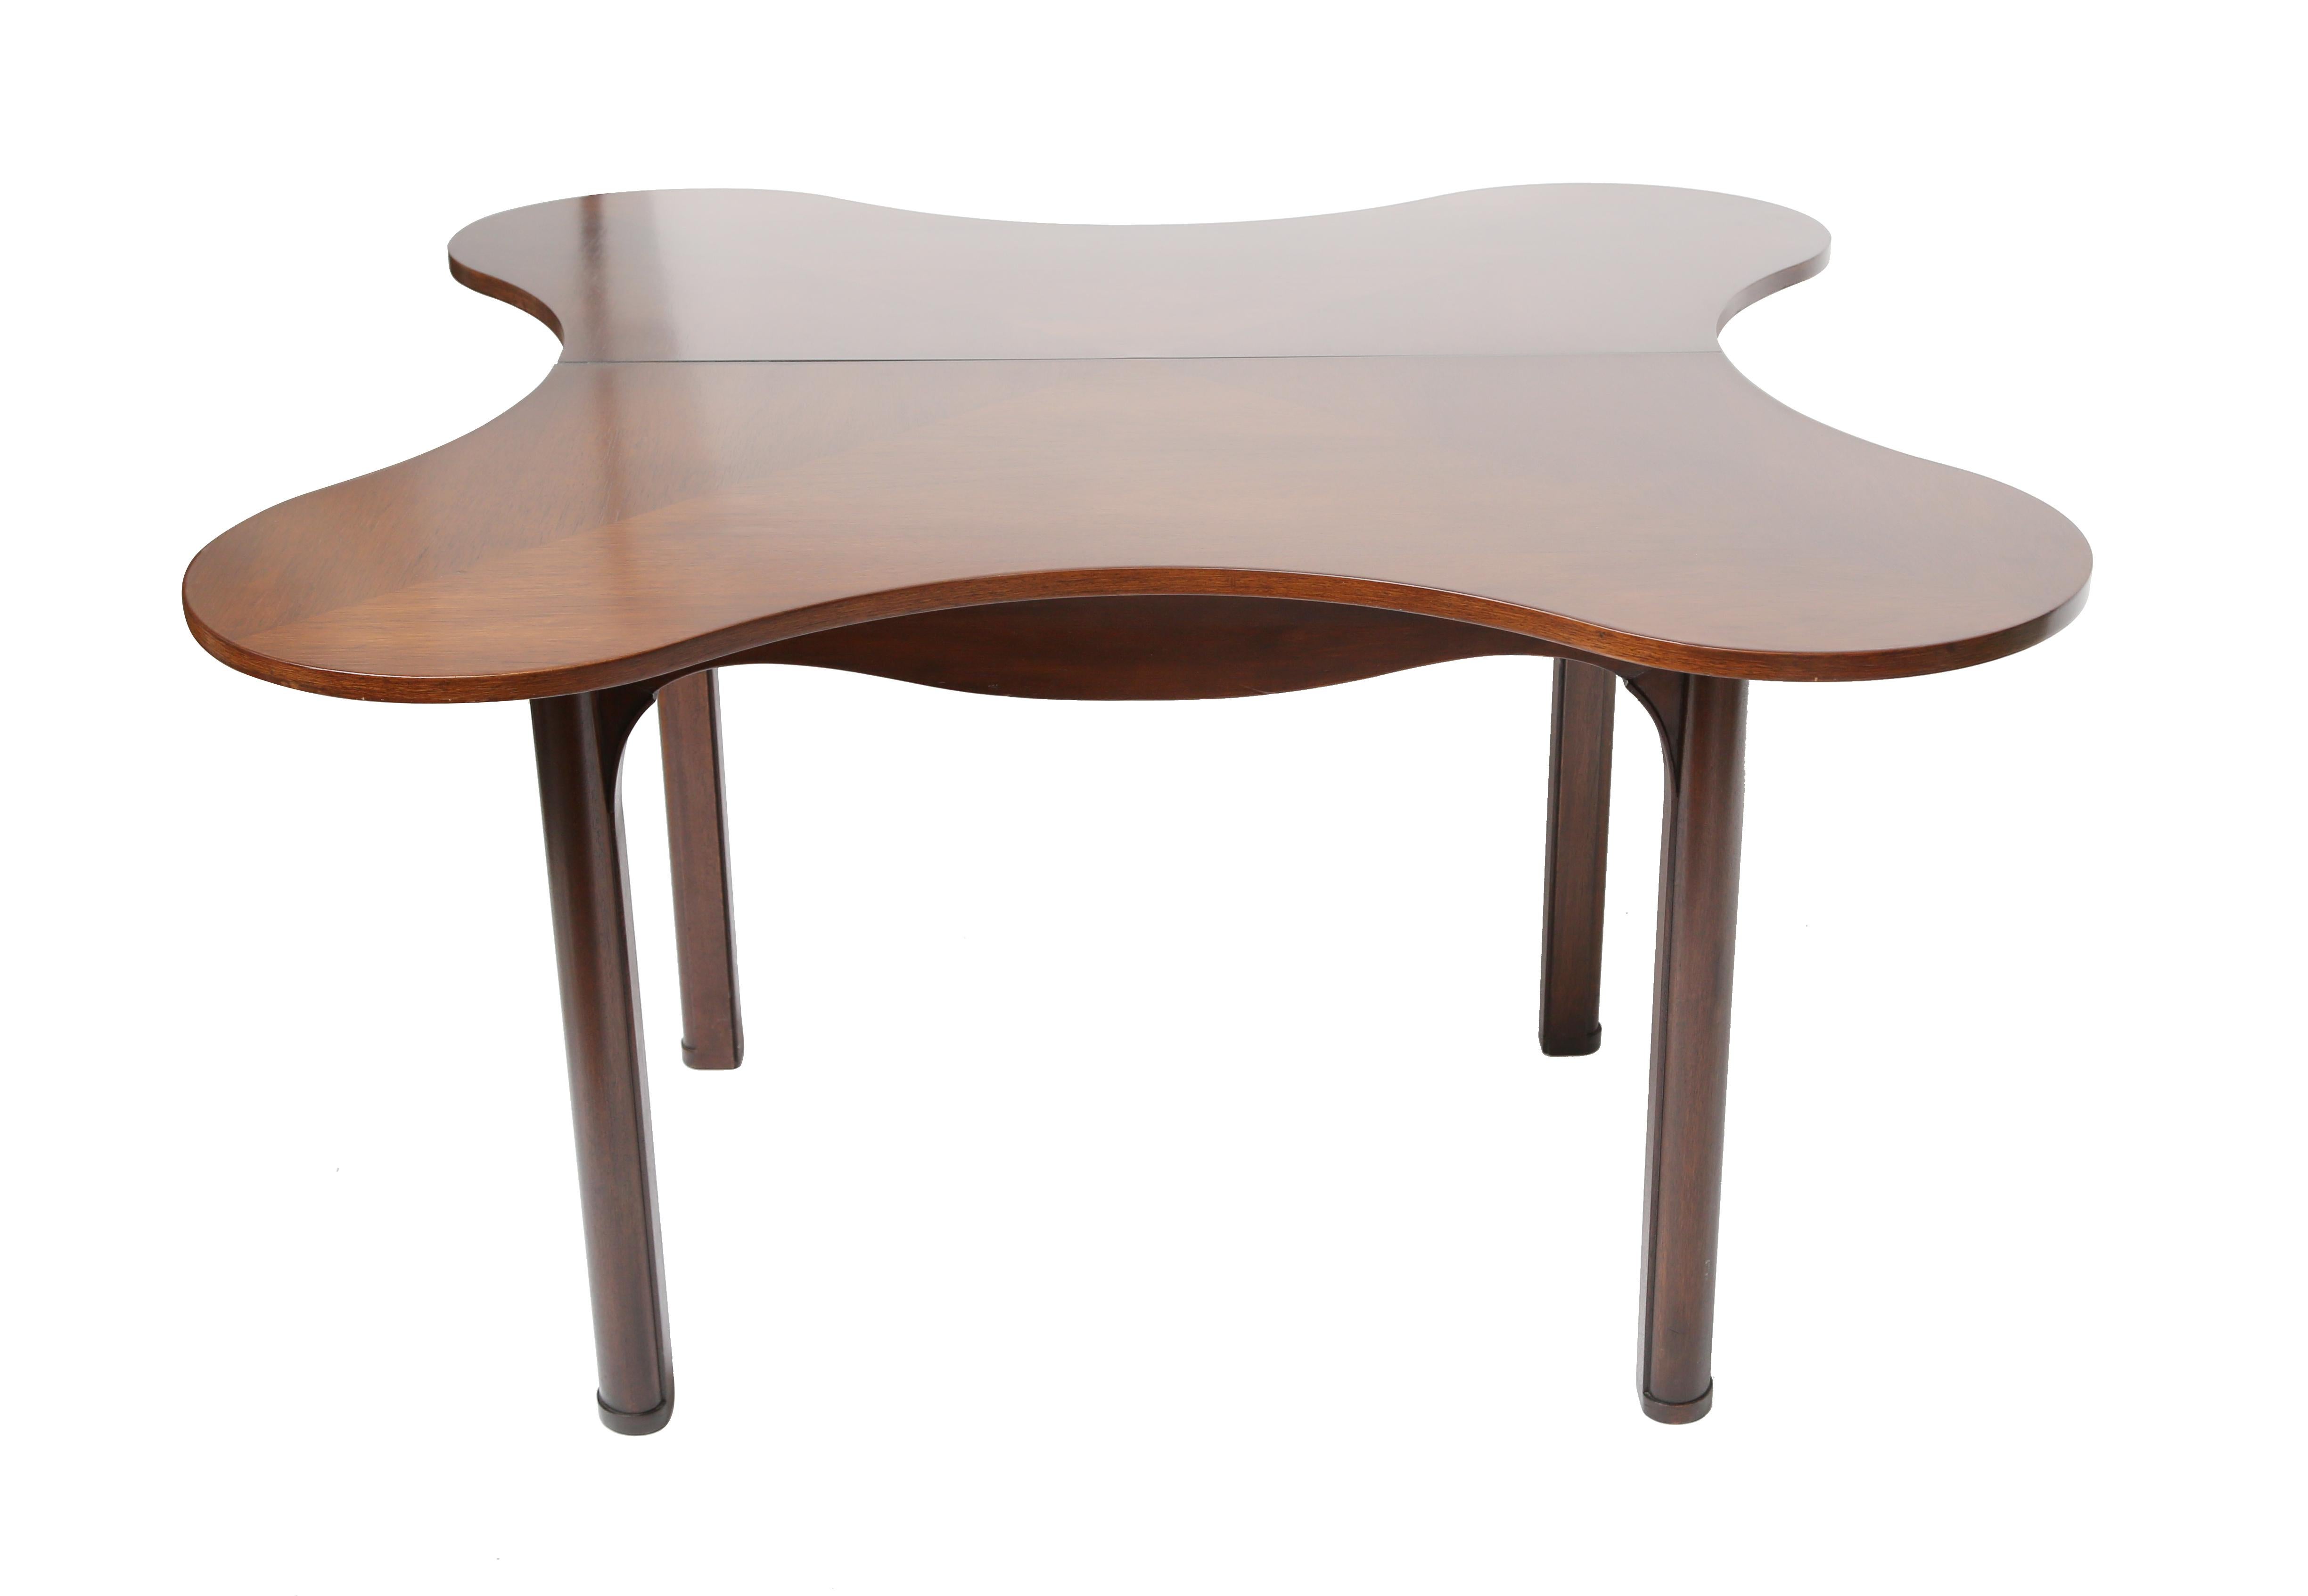 A beautiful and practical design.
The table utilizes bookmatched veneer to create an optic pattern.
Hidden compartment for silverware.
Probably a custom design.